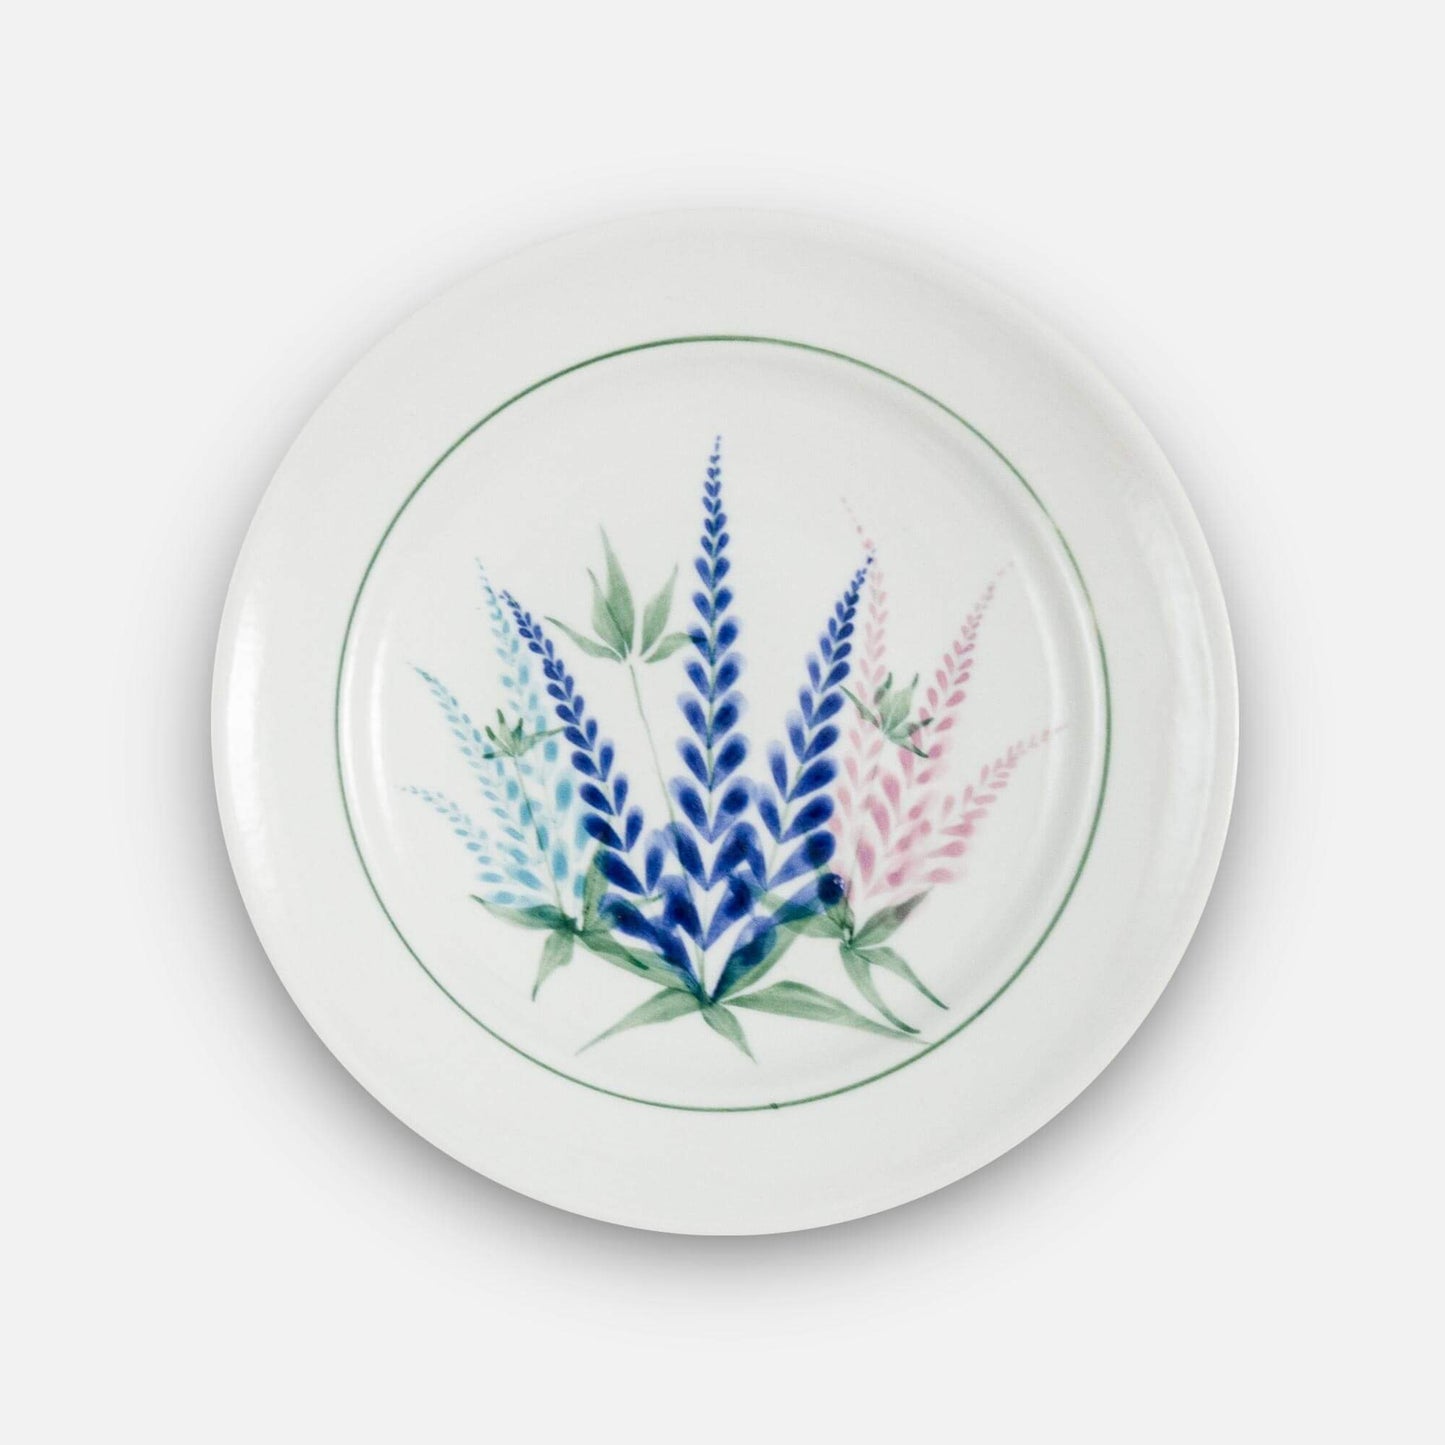 Handmade Pottery Footed Dessert Plate in Lupine pattern made by Georgetown Pottery in Maine